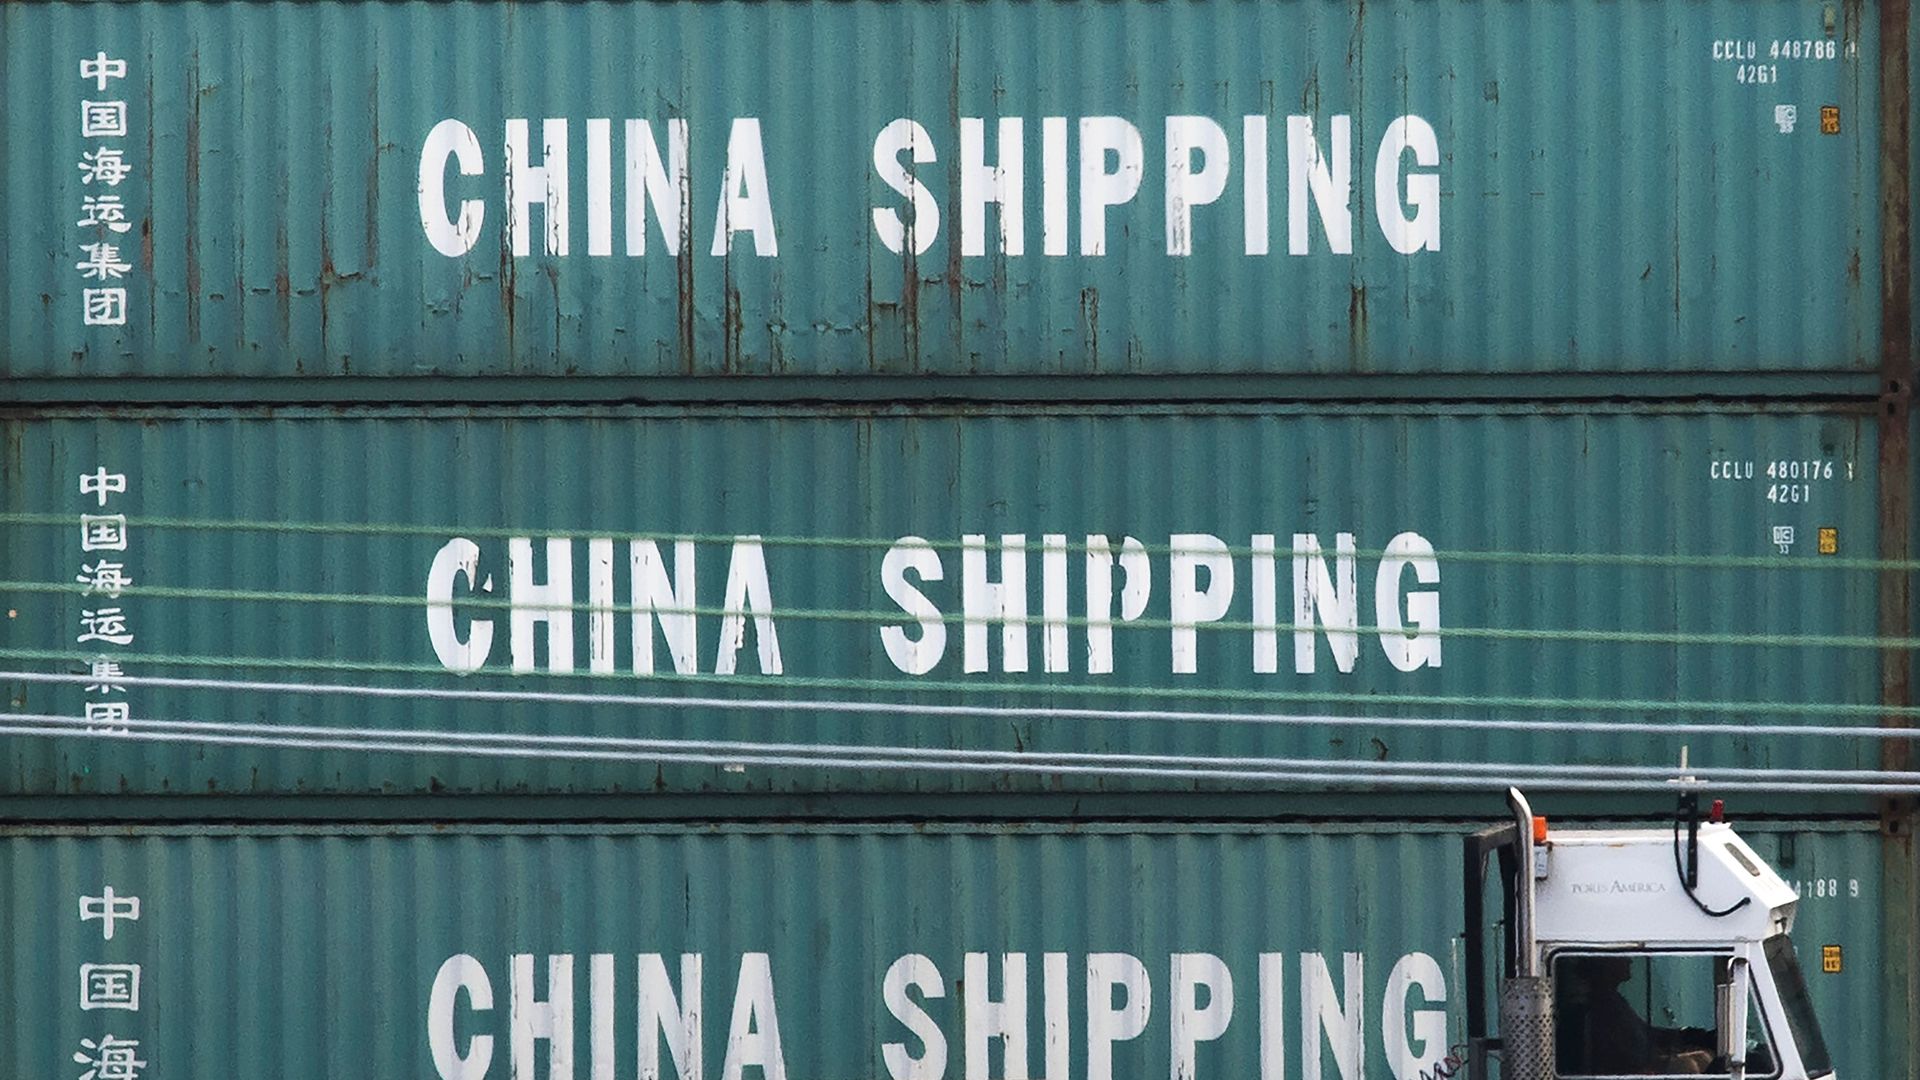 A truck passes by China Shipping containers at the Port of Los Angeles.